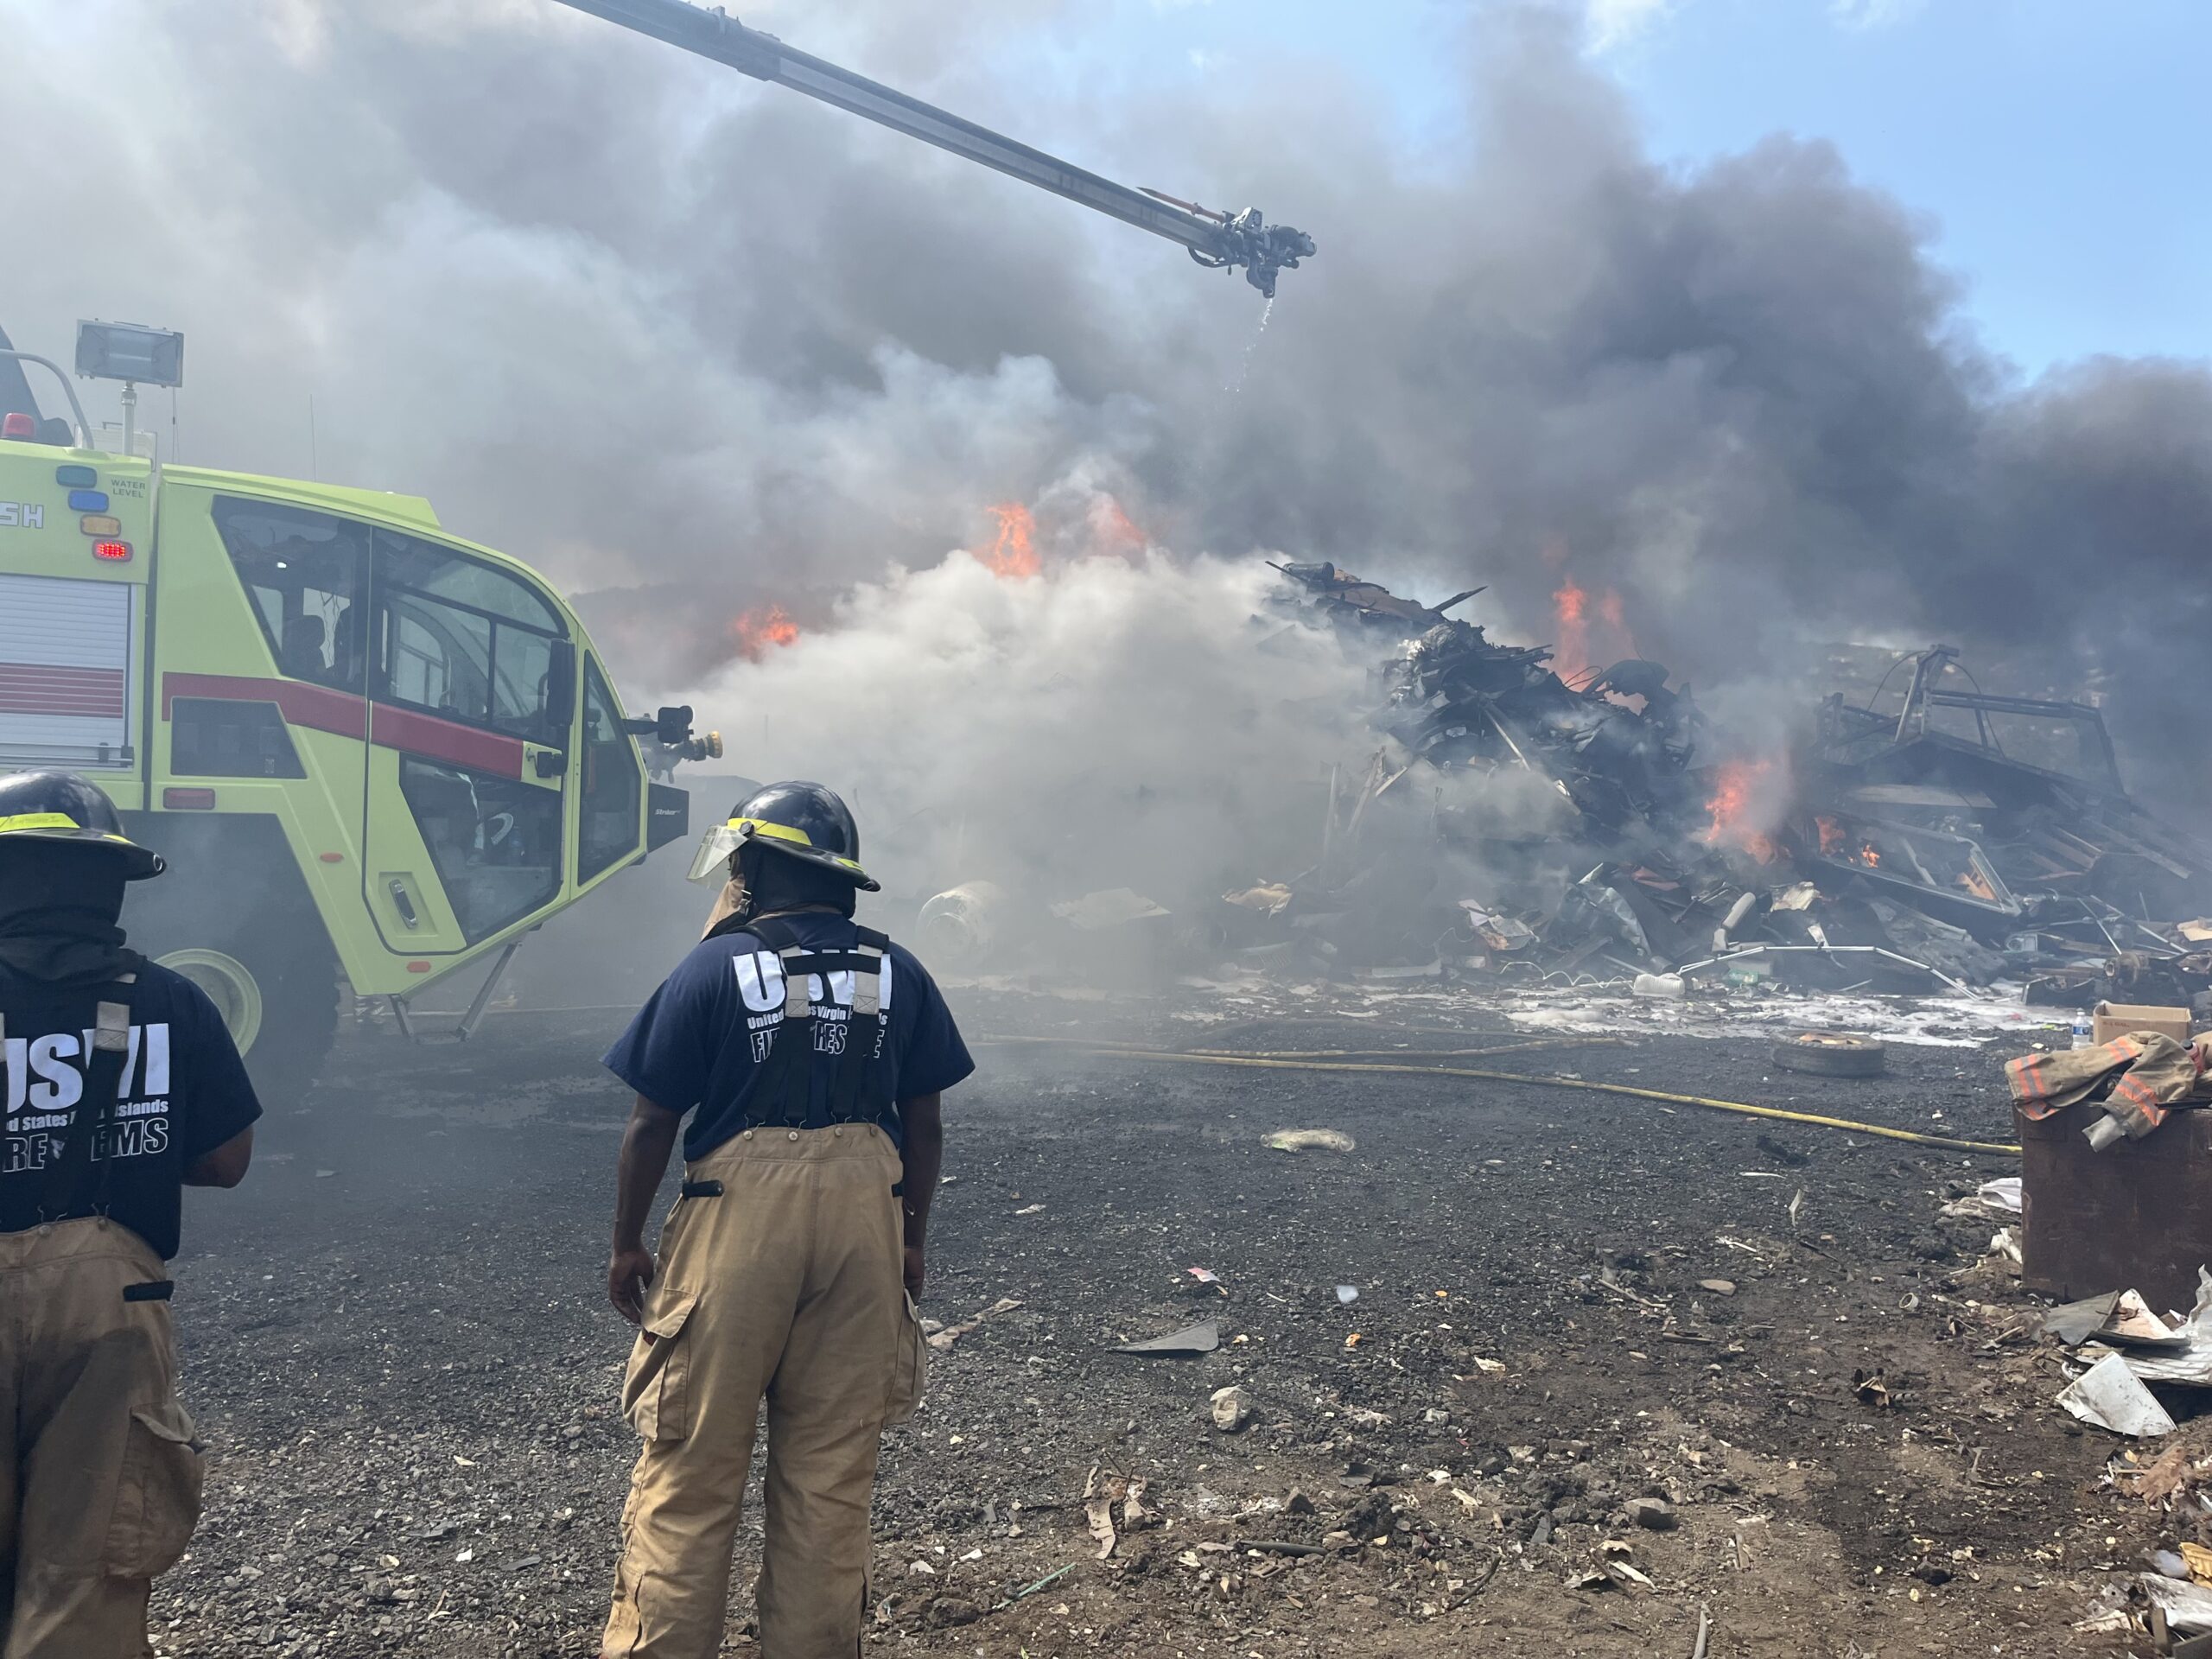 Firefighters work to extinguish a blaze that broke out Friday at the entrance to the Bovoni Landfill on St. Thomas. (Photo courtesy VIFEMS)